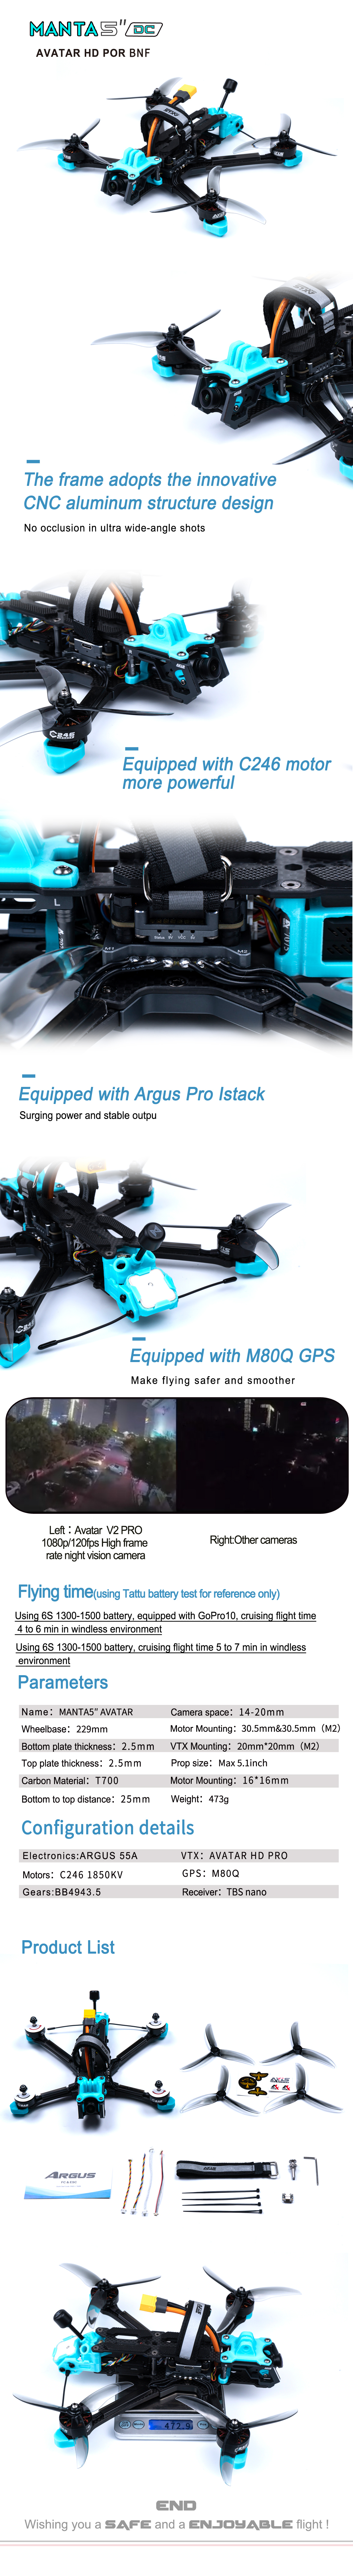 Axisflying MANTA5" / 5inch Walksnail Avatar HD Pro Kit fpv freestyle DeadCat-DC with GPS -6S Axisflying MANTA 5 inch DC BNF professional remote control drones with camera and gps cinematic drone,cinewhoop drone,longrange drone,freestyle drone,fpv drone,fpv quads,5inch freestyle drone,7inch longrange drone,5inch quads,6inch quads,7inch LR quads,7" fpv drone,7" fpv quads,7" longrange quads,6" cinematic quads,5"cinematic drone,DJI O3,DJI O3 Air Unit,remote control drones with camera,professional drones with camera and gps